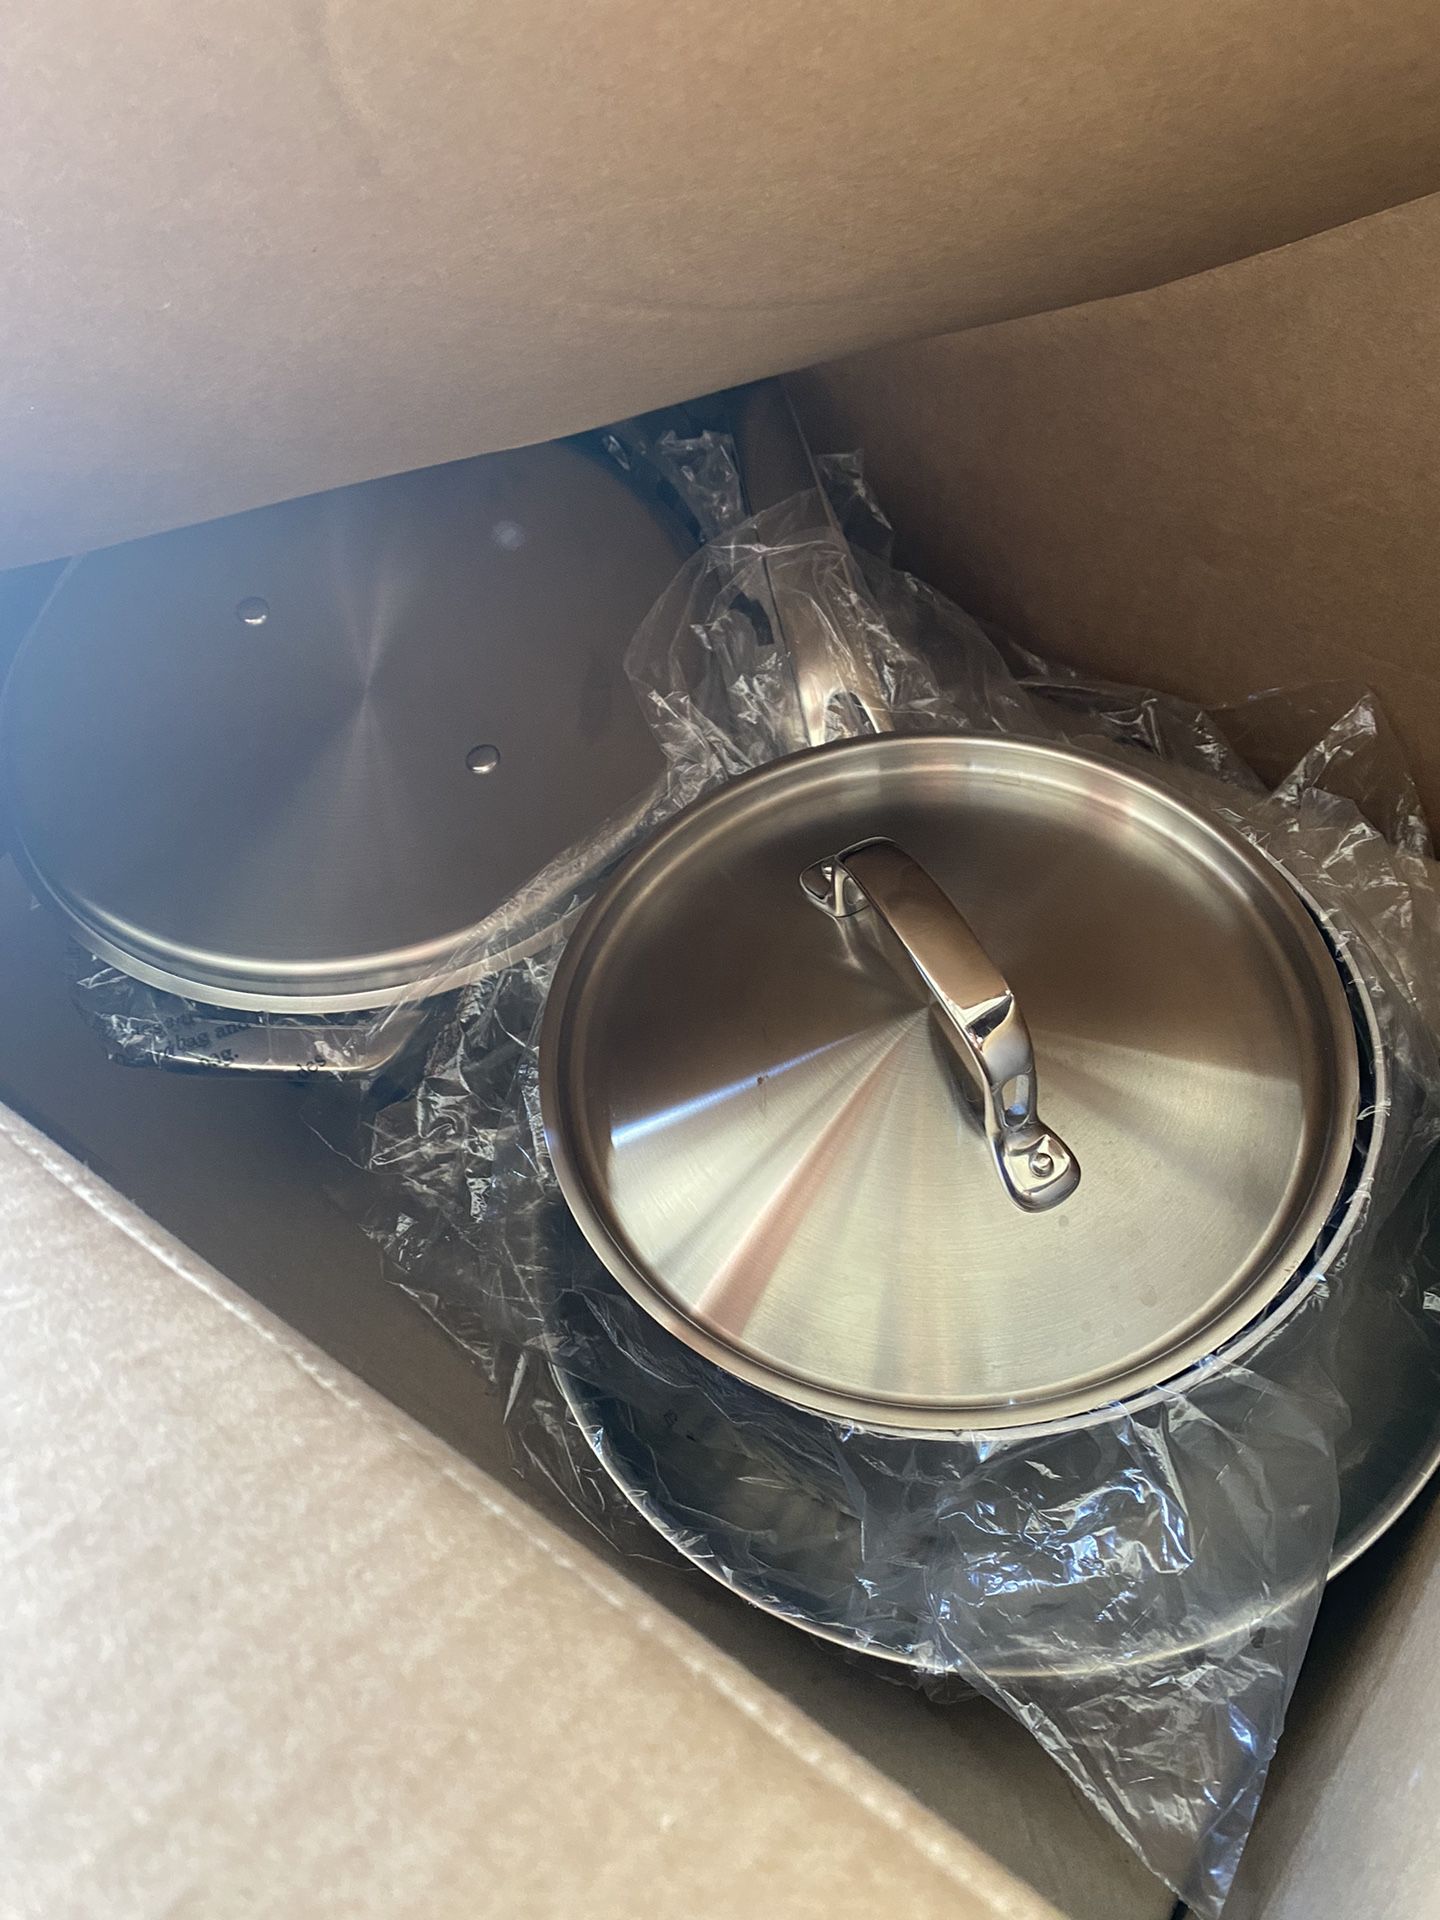 Tramontina Stainless Steel Induction-Ready, Impact-Bonded, Steamer Set, 5  Quart for Sale in Santa Fe Springs, CA - OfferUp